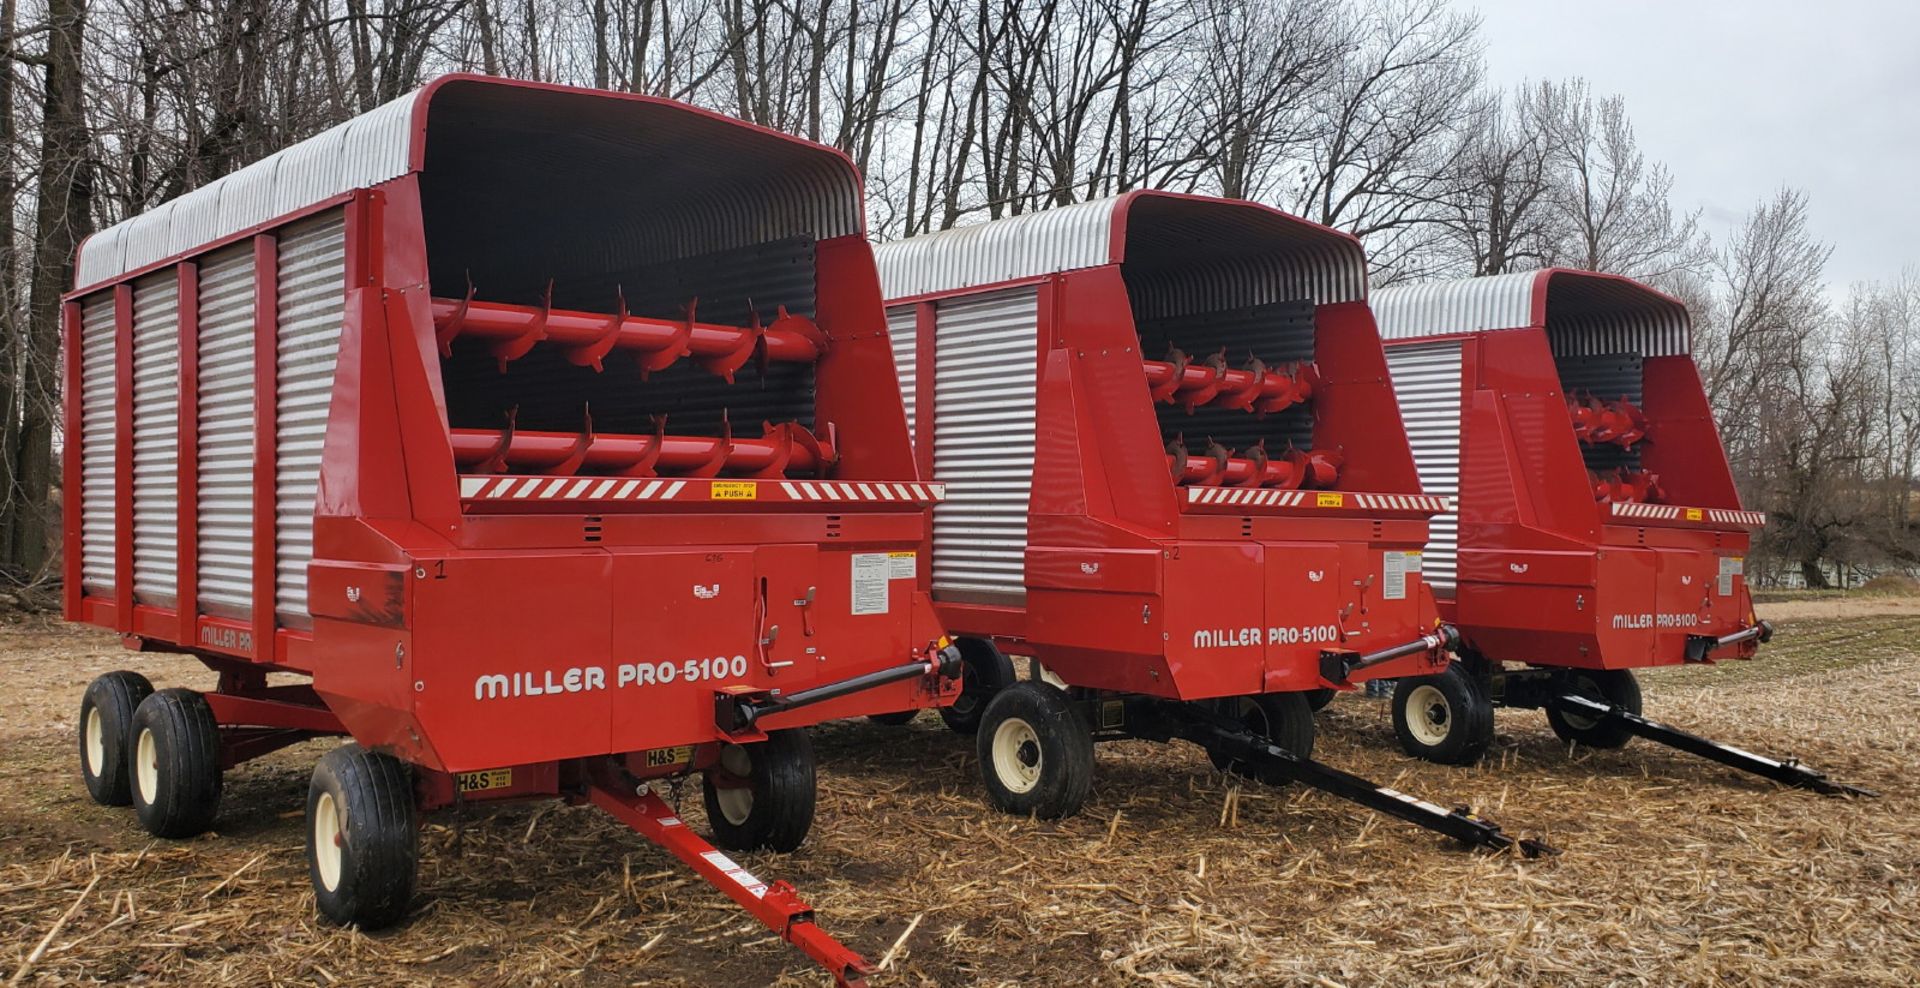 MILLER PRO 5100 16' LH SU FORAGE WAGON (SELLING CHOICE OF 3)